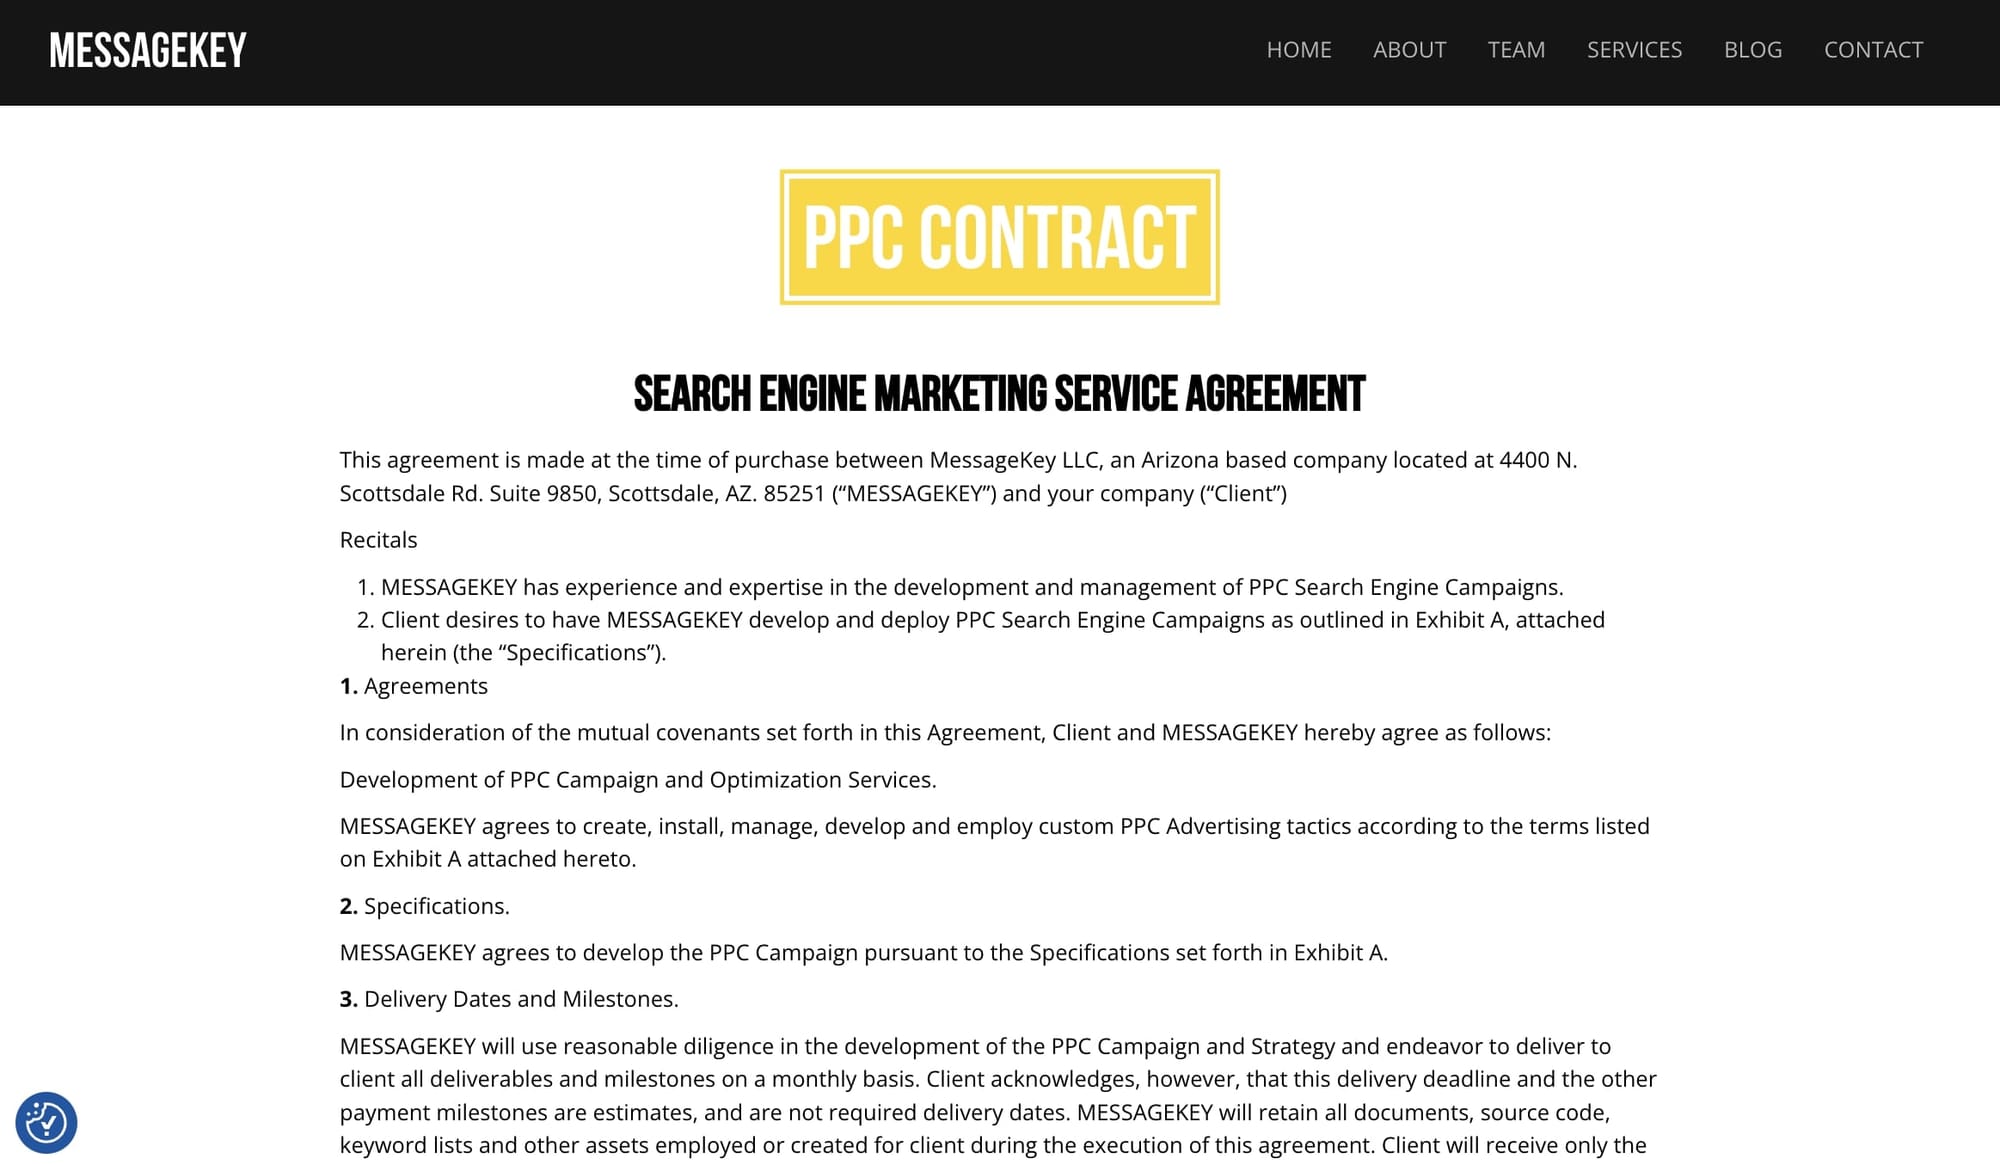 PPC contract template by MessageKey